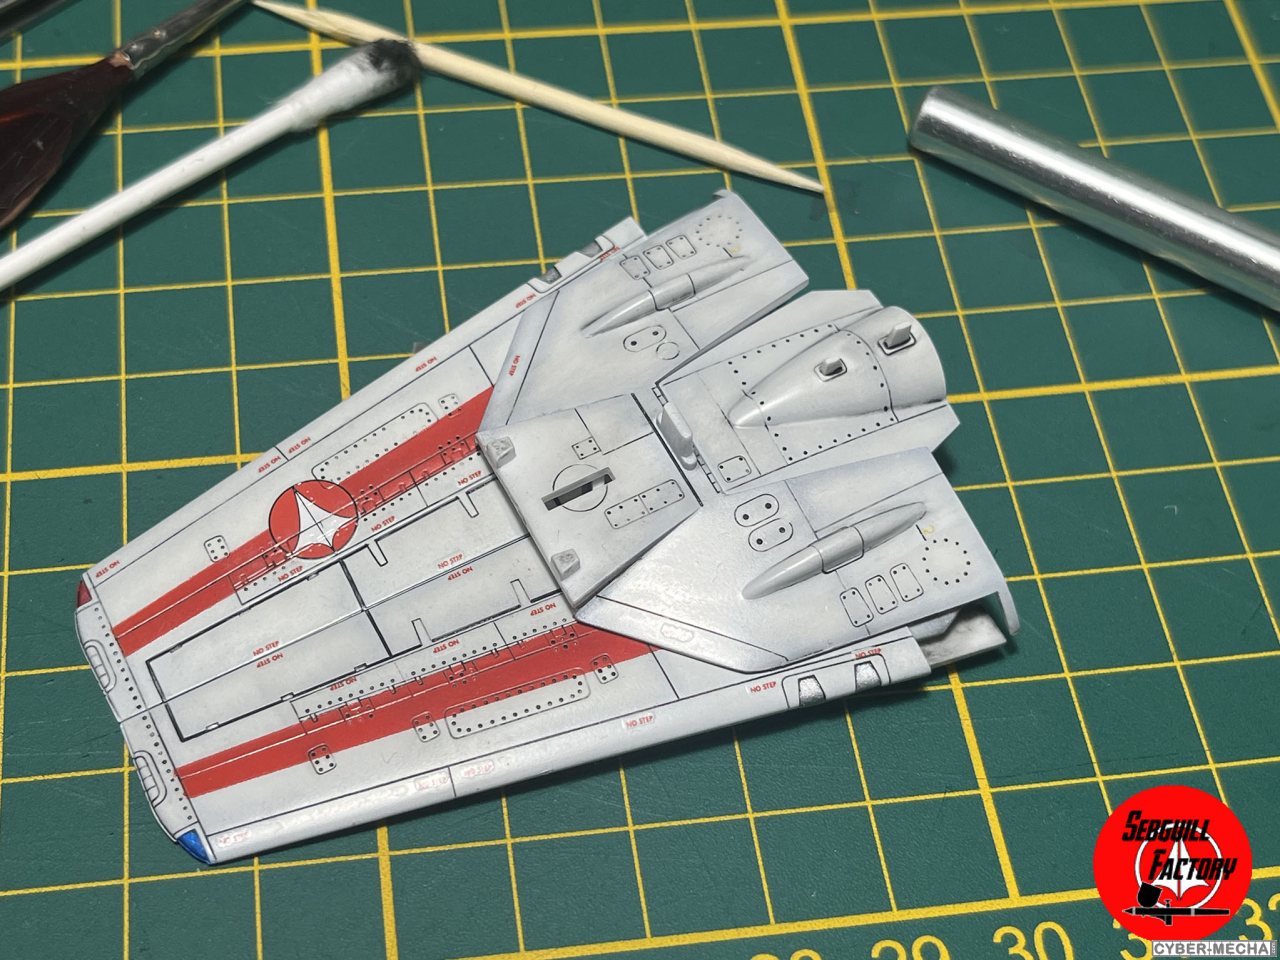 [Hasegawa] 1/72 - VF-1j Armored valkyrie  - Page 3 1708882663